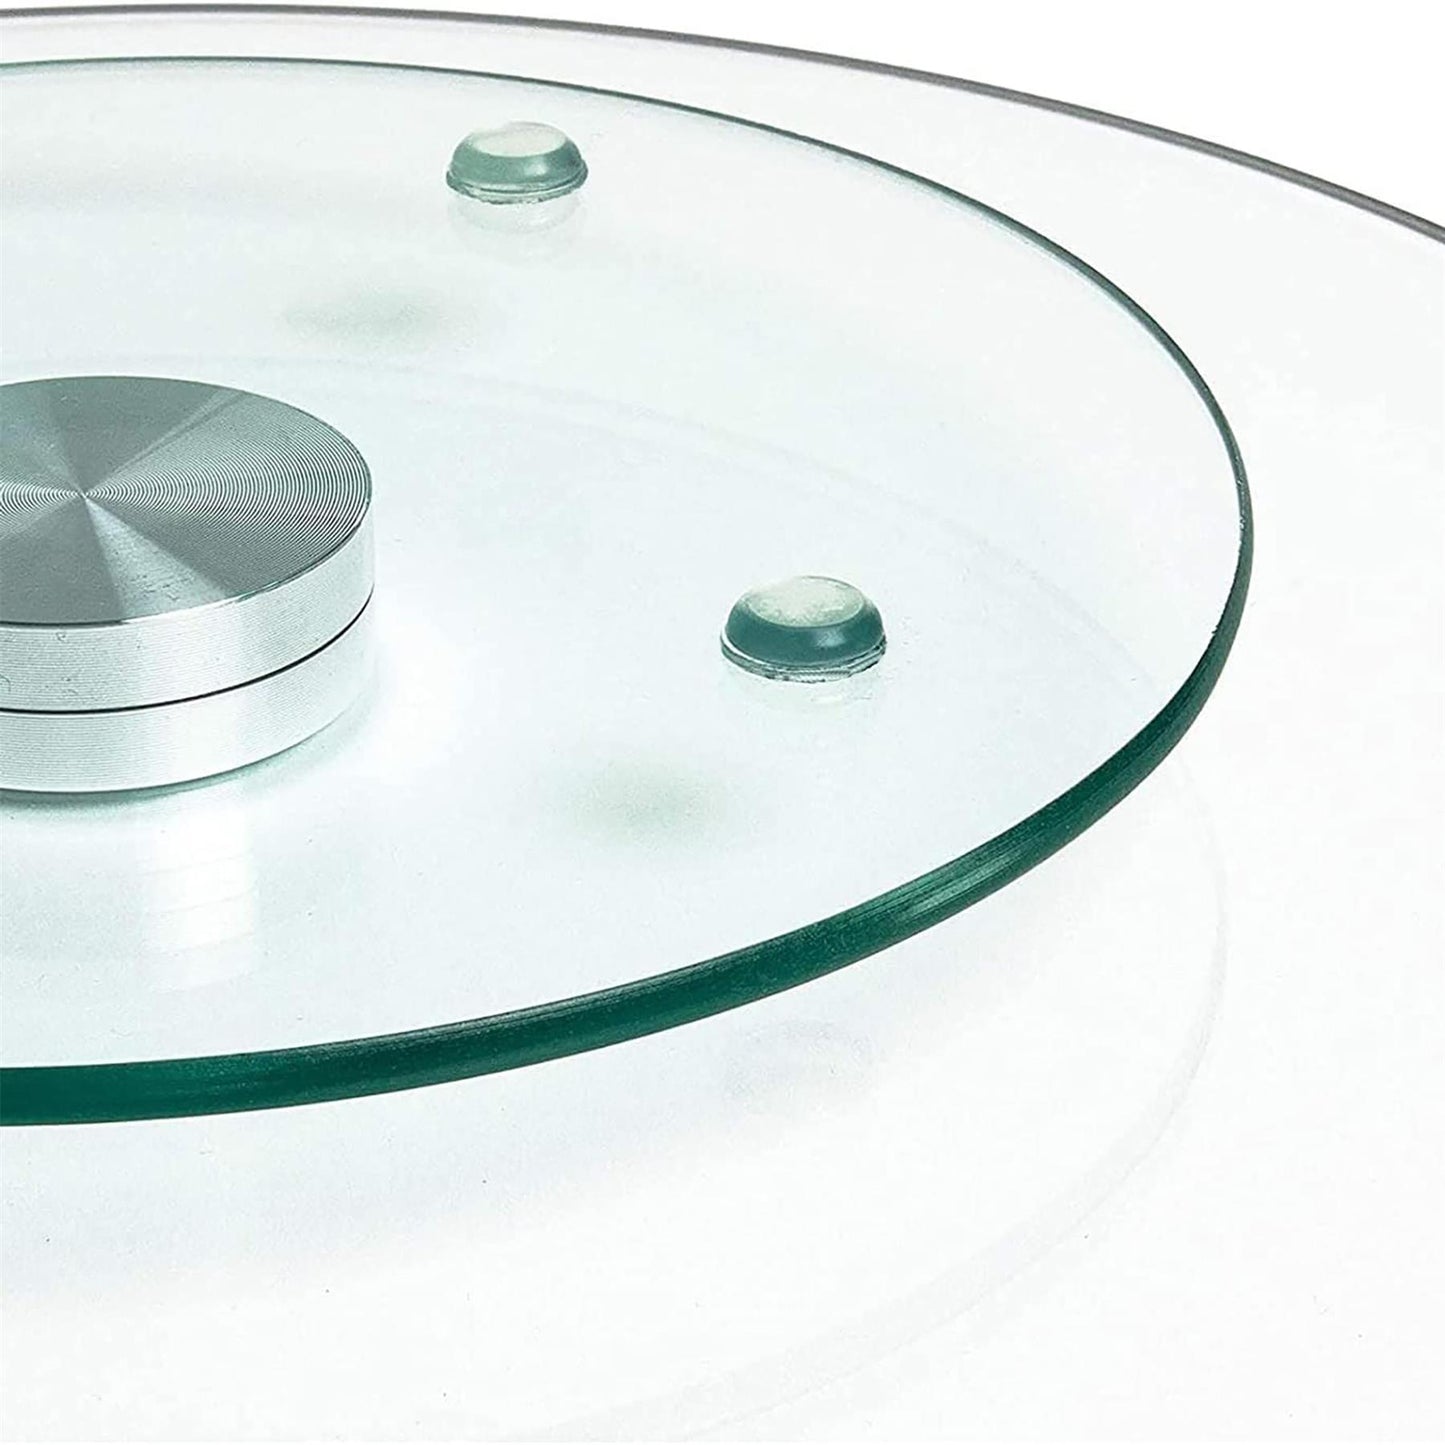 Lazy Susan Rotating Turntable 25cm by GEEZY - UKBuyZone